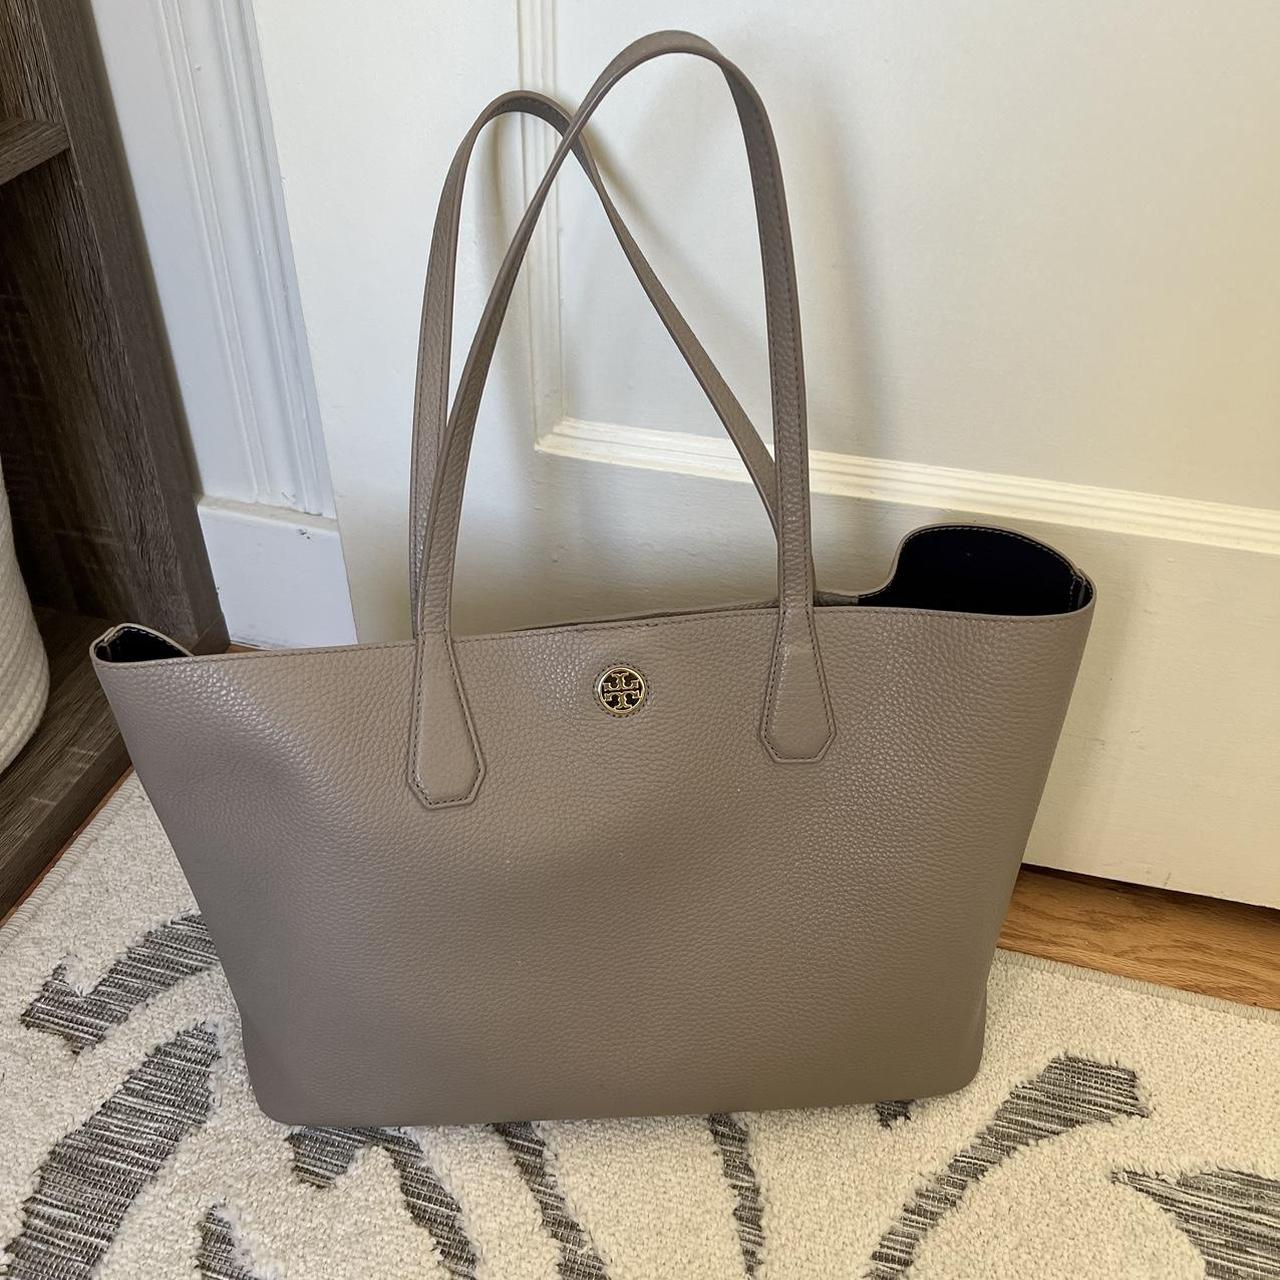 Tory Burch Silver Perry Tote